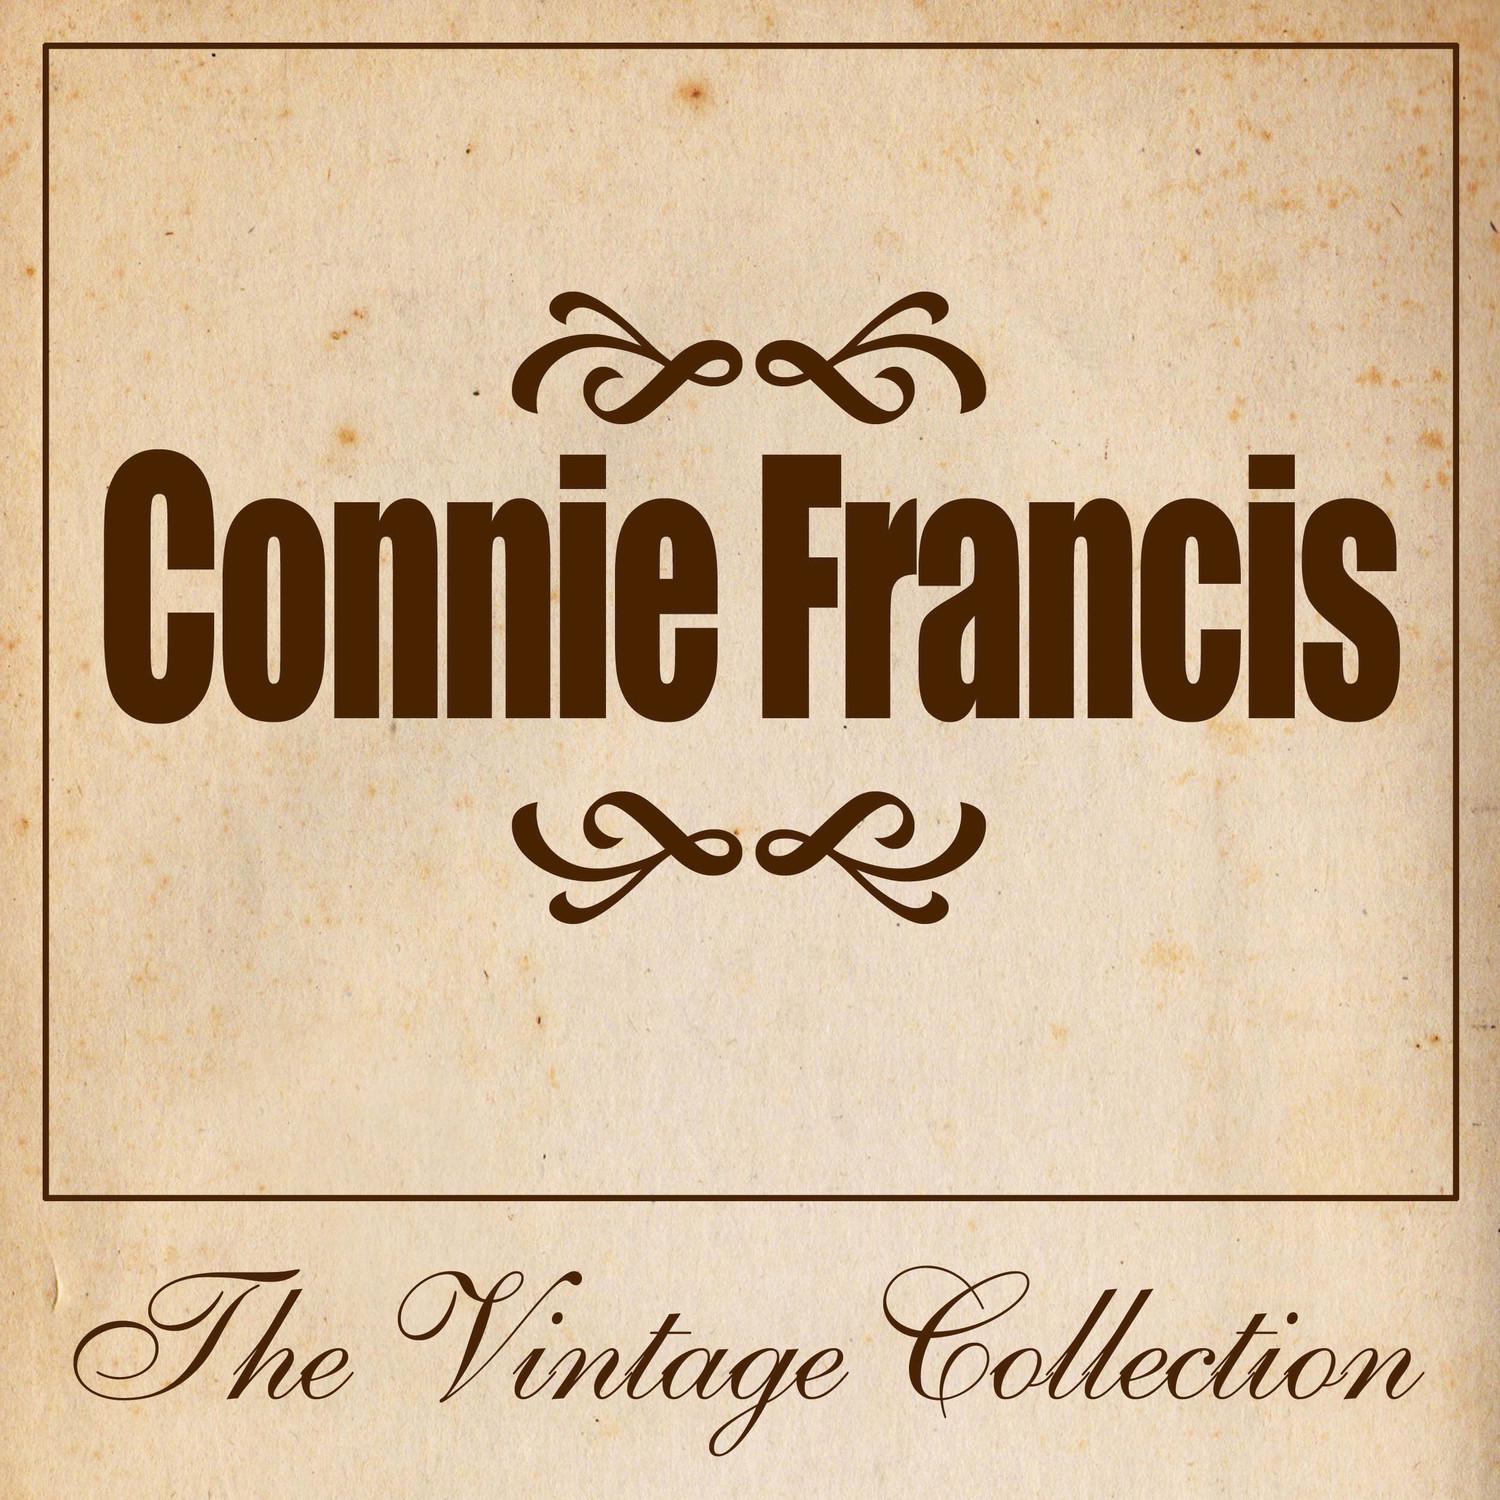 Connie Francis - The Vintage Collection